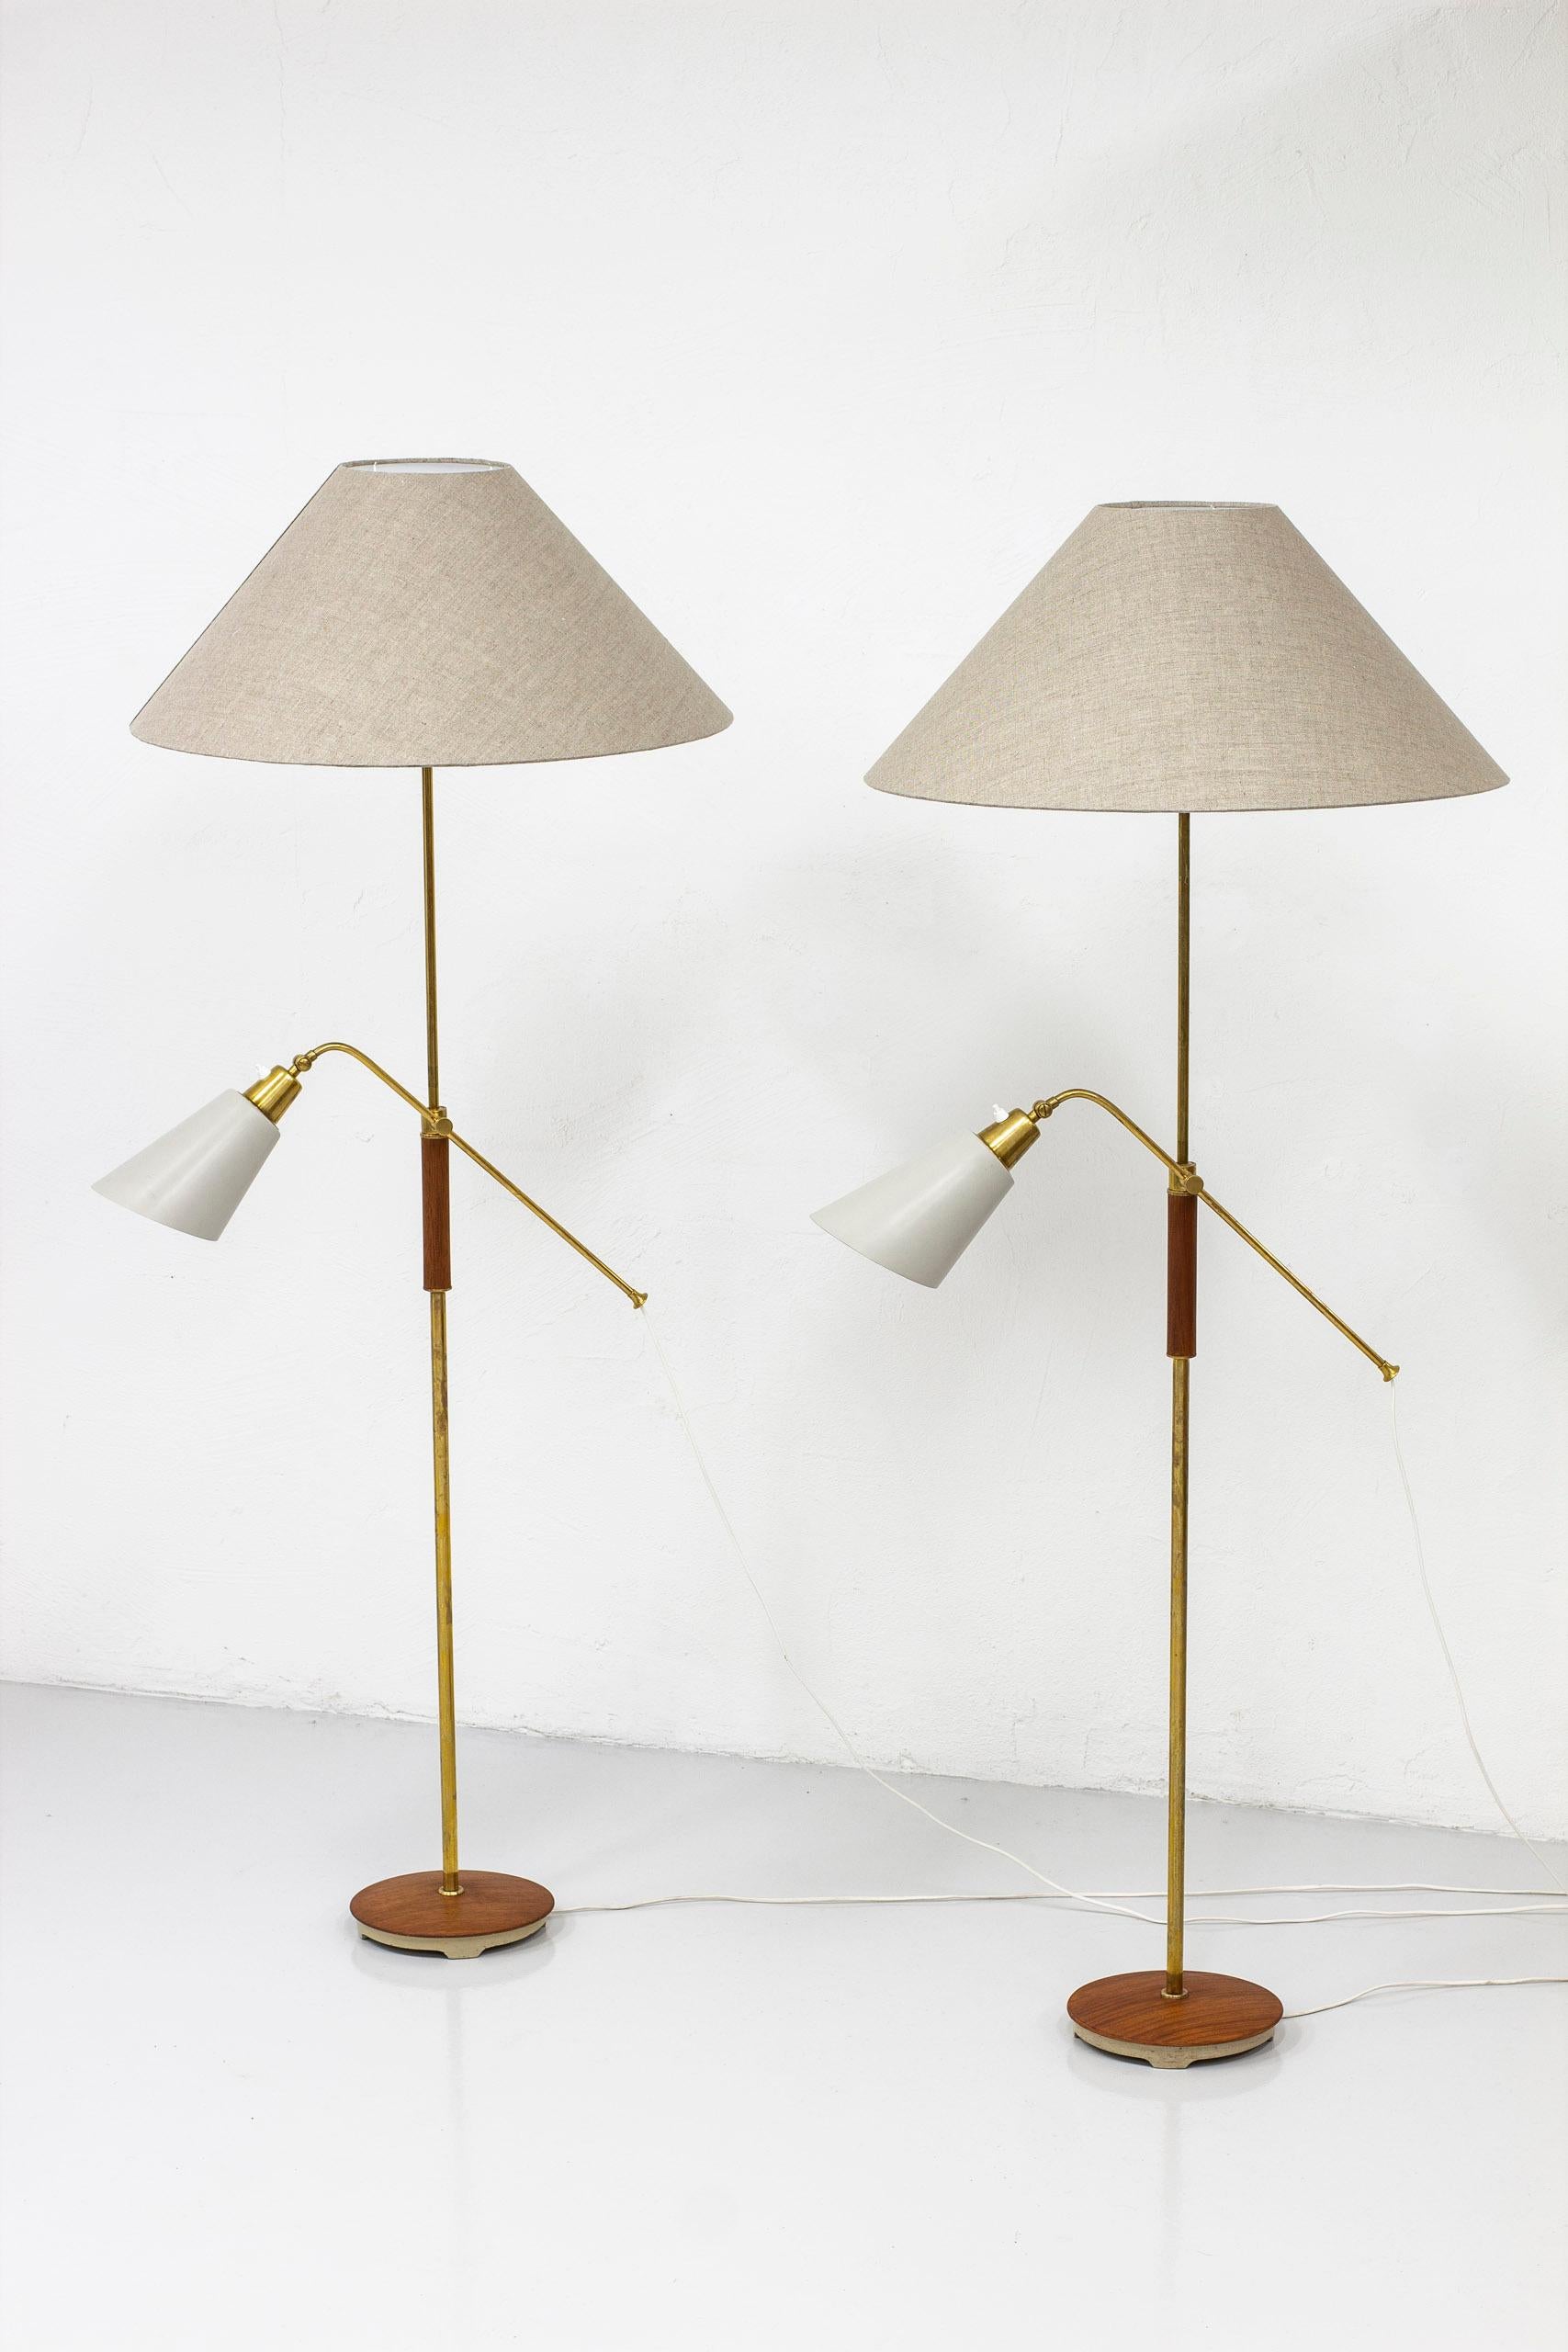 Floor lamps designed ca 1952 by Bertil Brisborg. Produced for the 